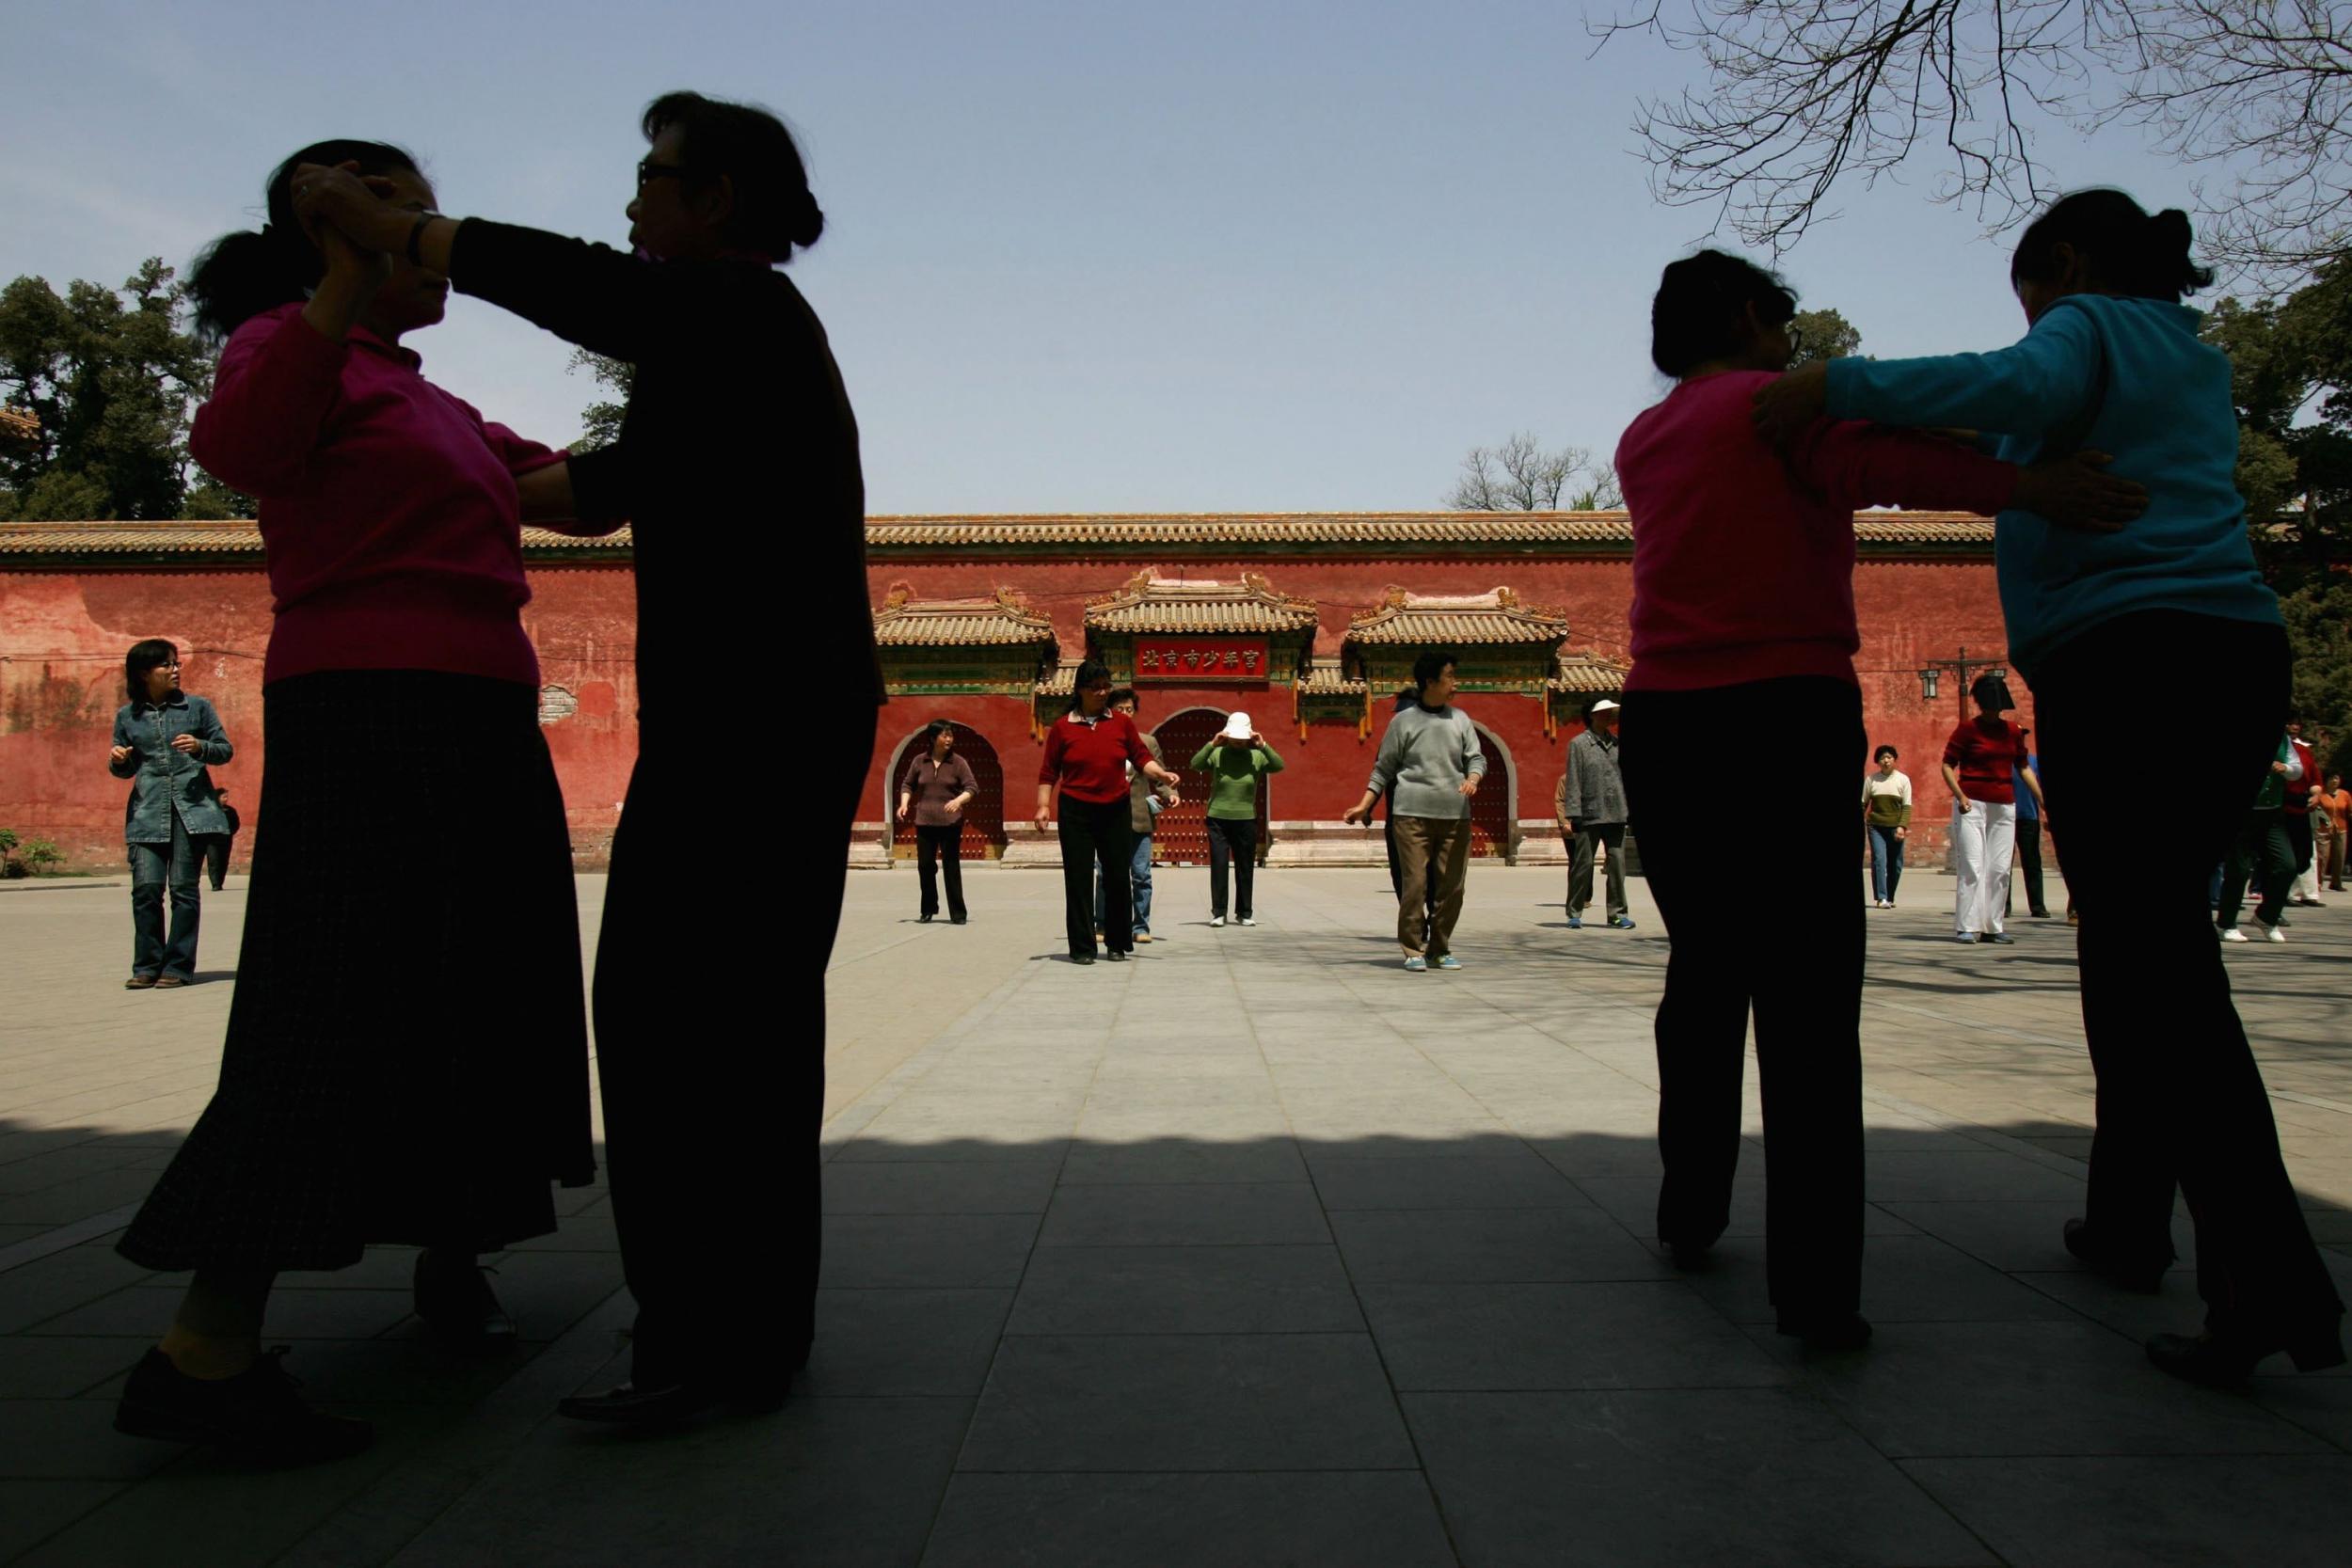 Join the locals for a quick dance in Jingshan Park